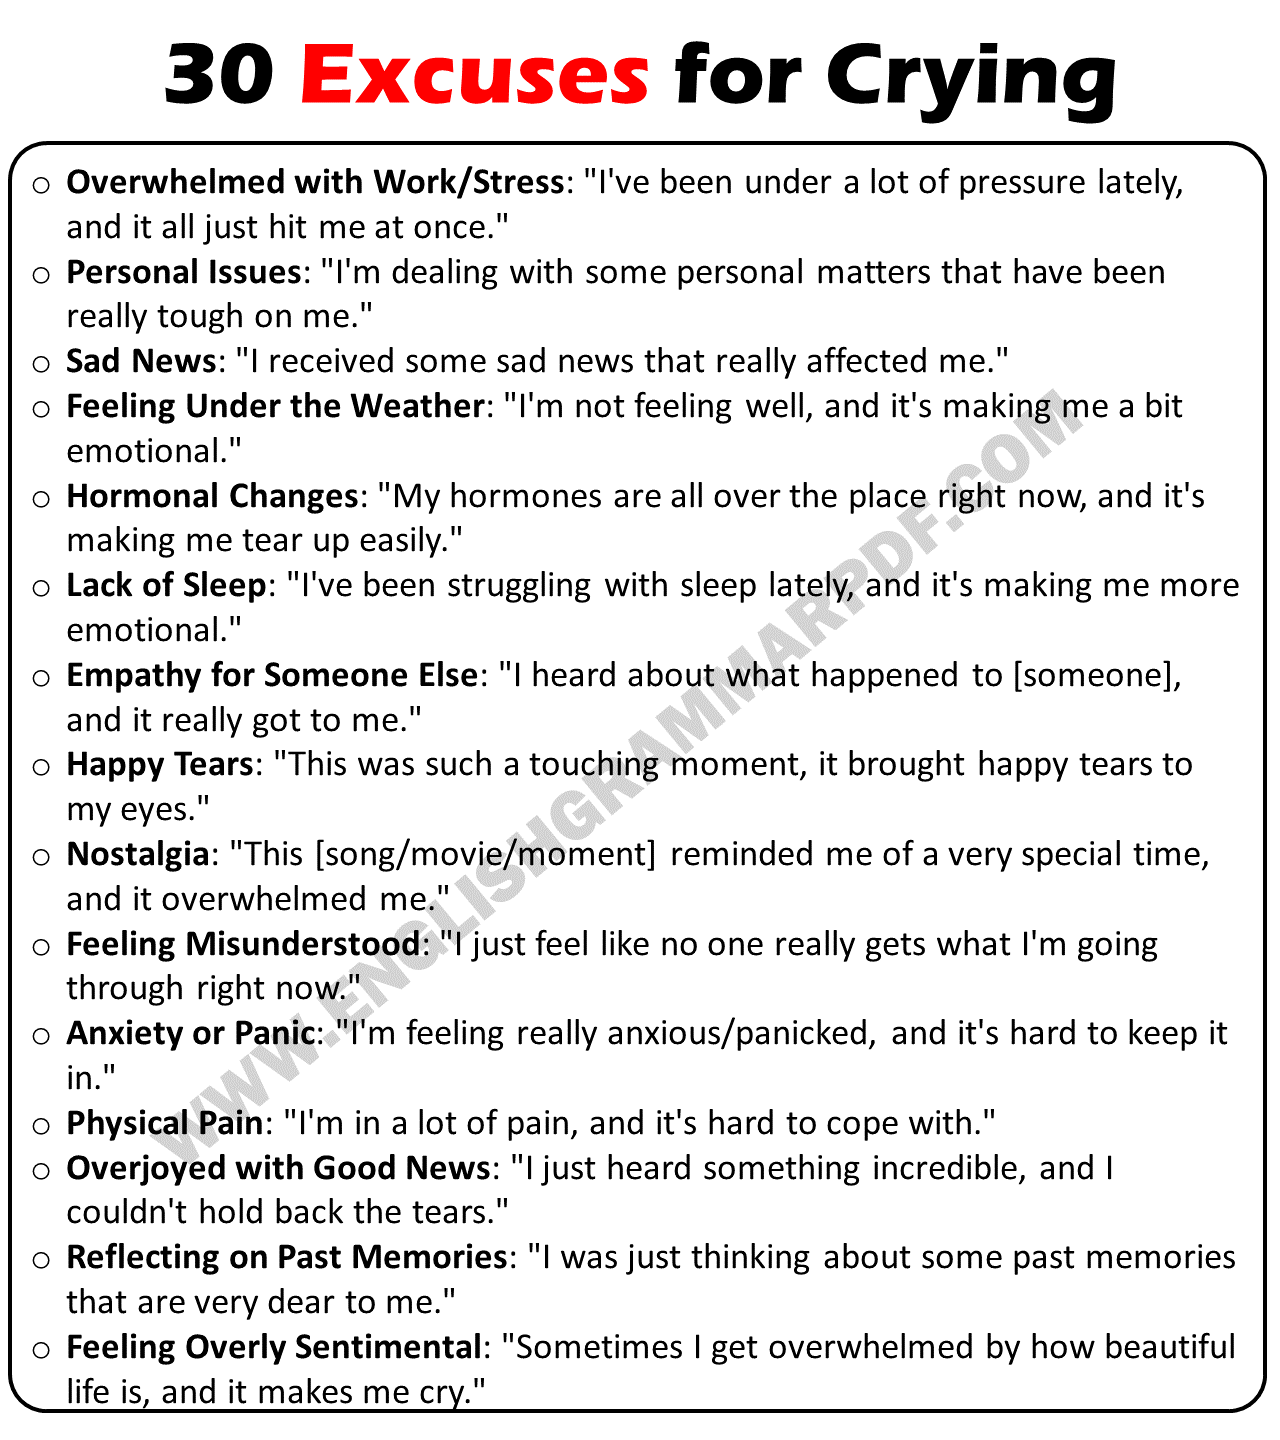 30 Excuses for Crying